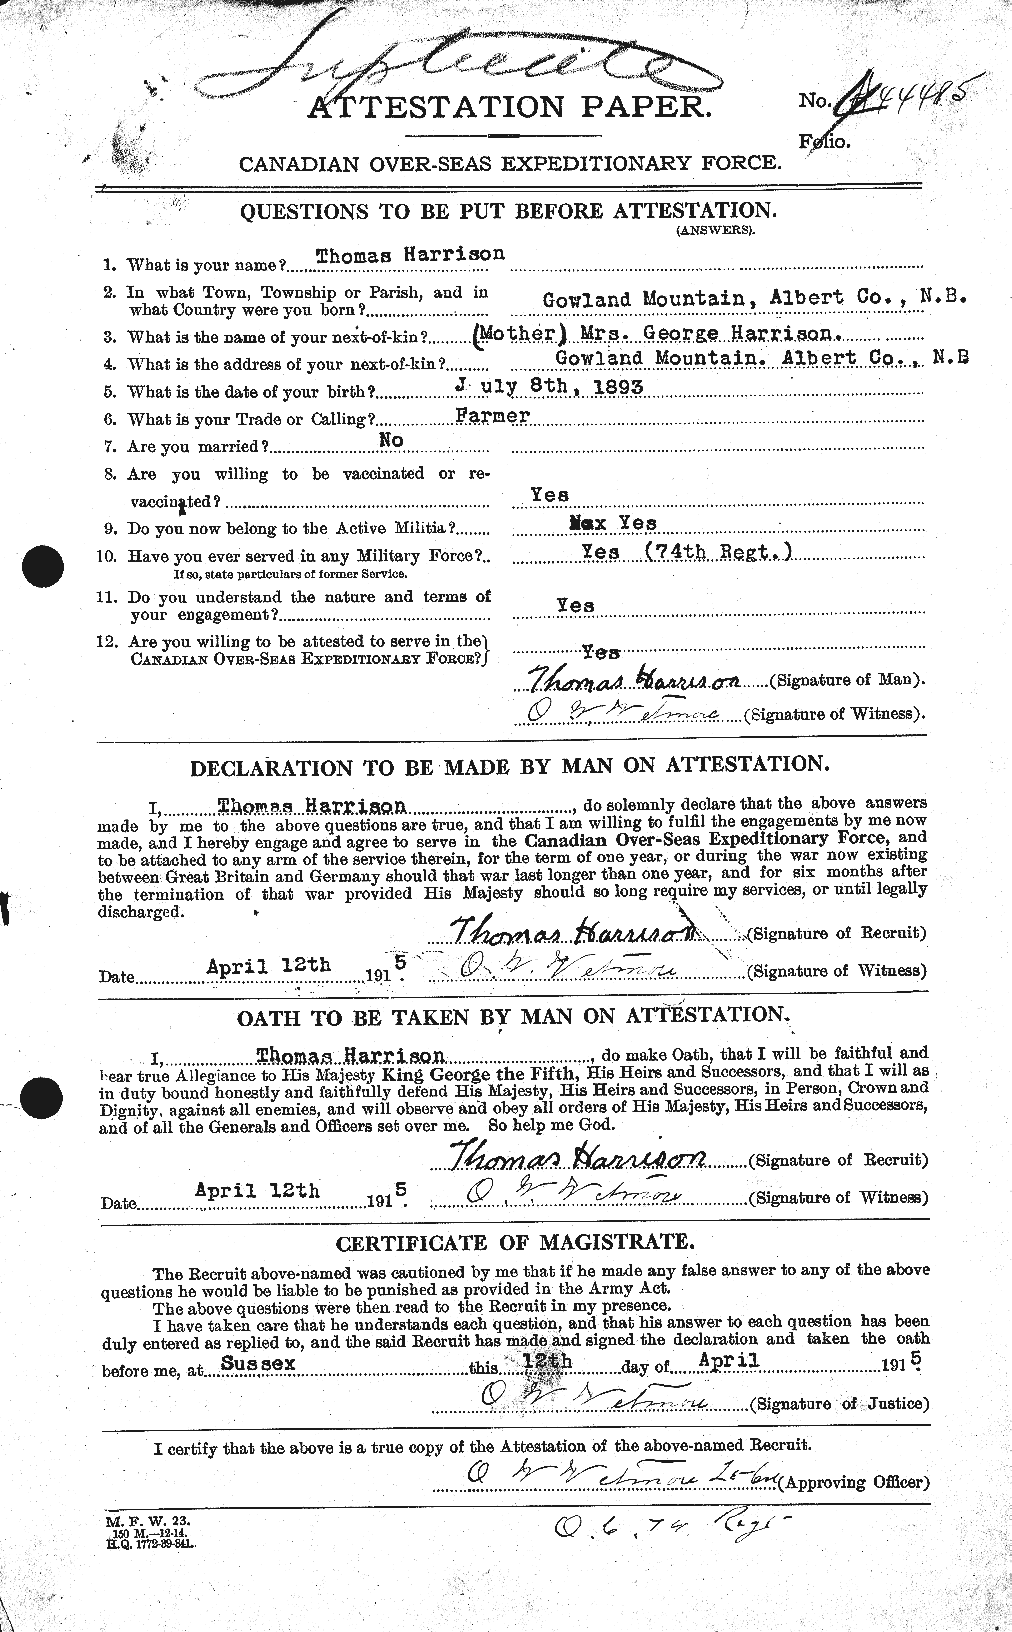 Personnel Records of the First World War - CEF 379877a